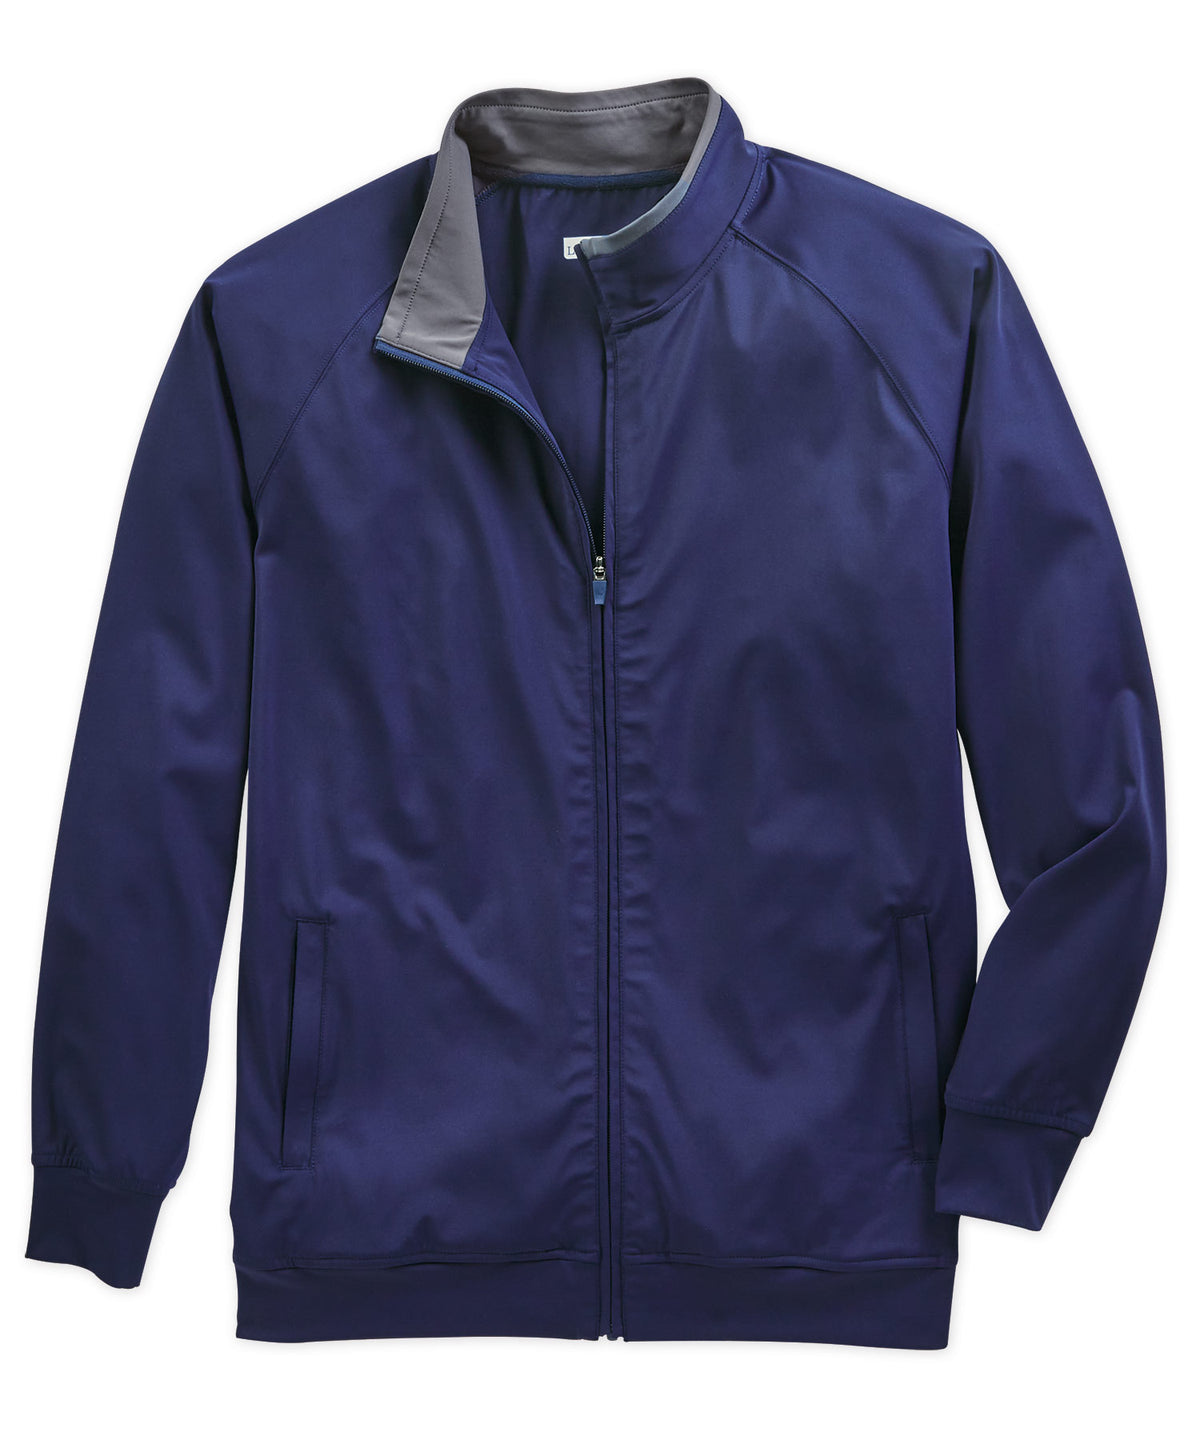 Westport Lifestyle All Day Performance Jacket, Big & Tall